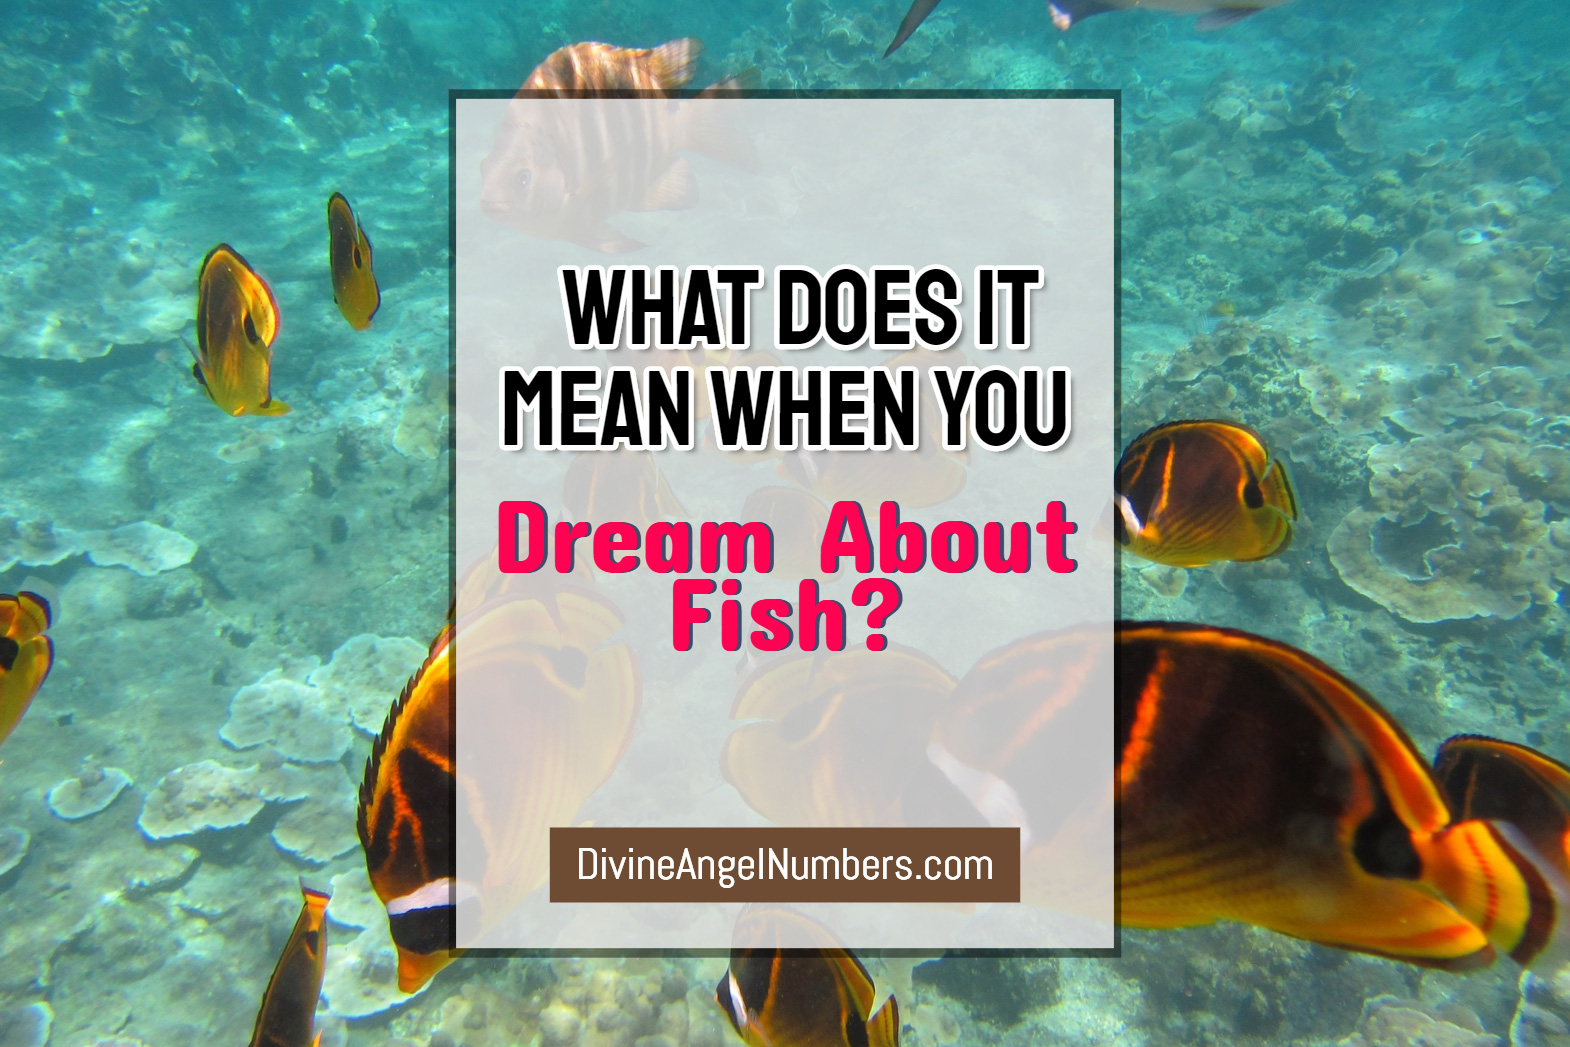 What Does it Mean When You Dream About Fish? [Update 2021]